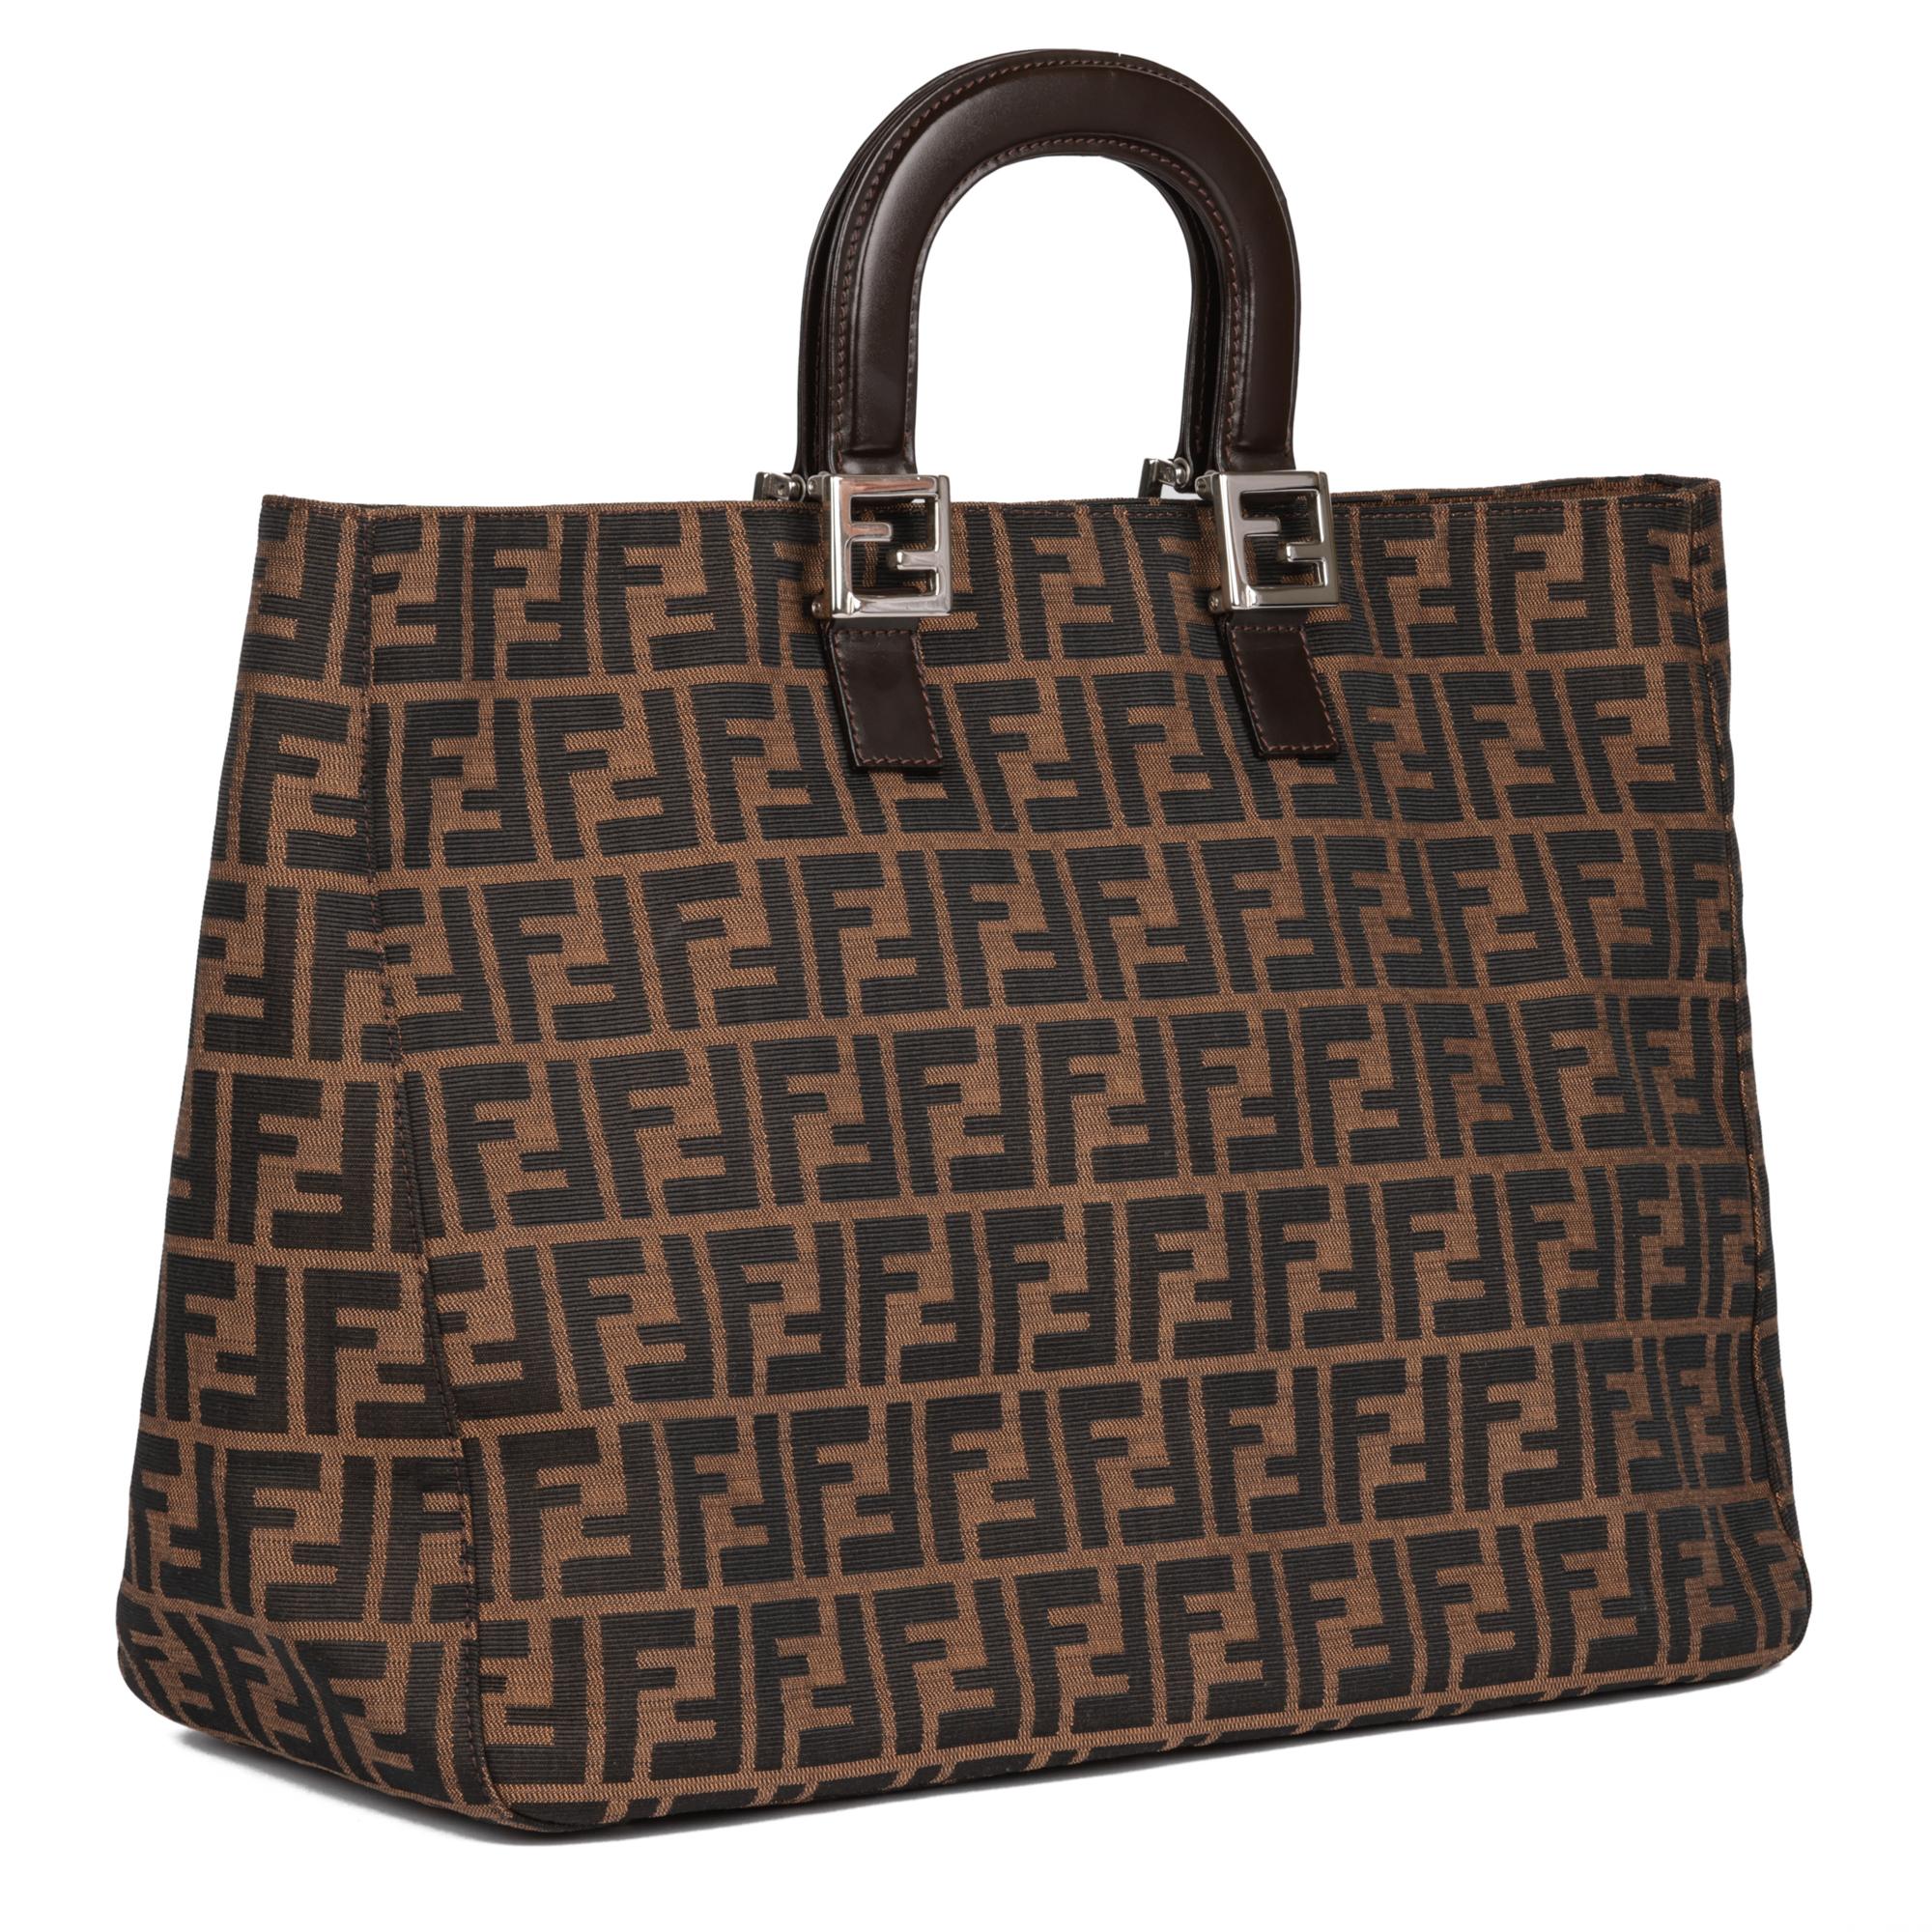 FENDI
Brown Zucca Monogram Canvas & Calfskin Leather Vintage Large Tote

Xupes Reference: HB5066
Serial Number: 2305-26329-008
Age (Circa): 2000
Authenticity Details: Date Stamp (Made in Italy)
Gender: Ladies
Type: Tote

Colour: Brown
Hardware: